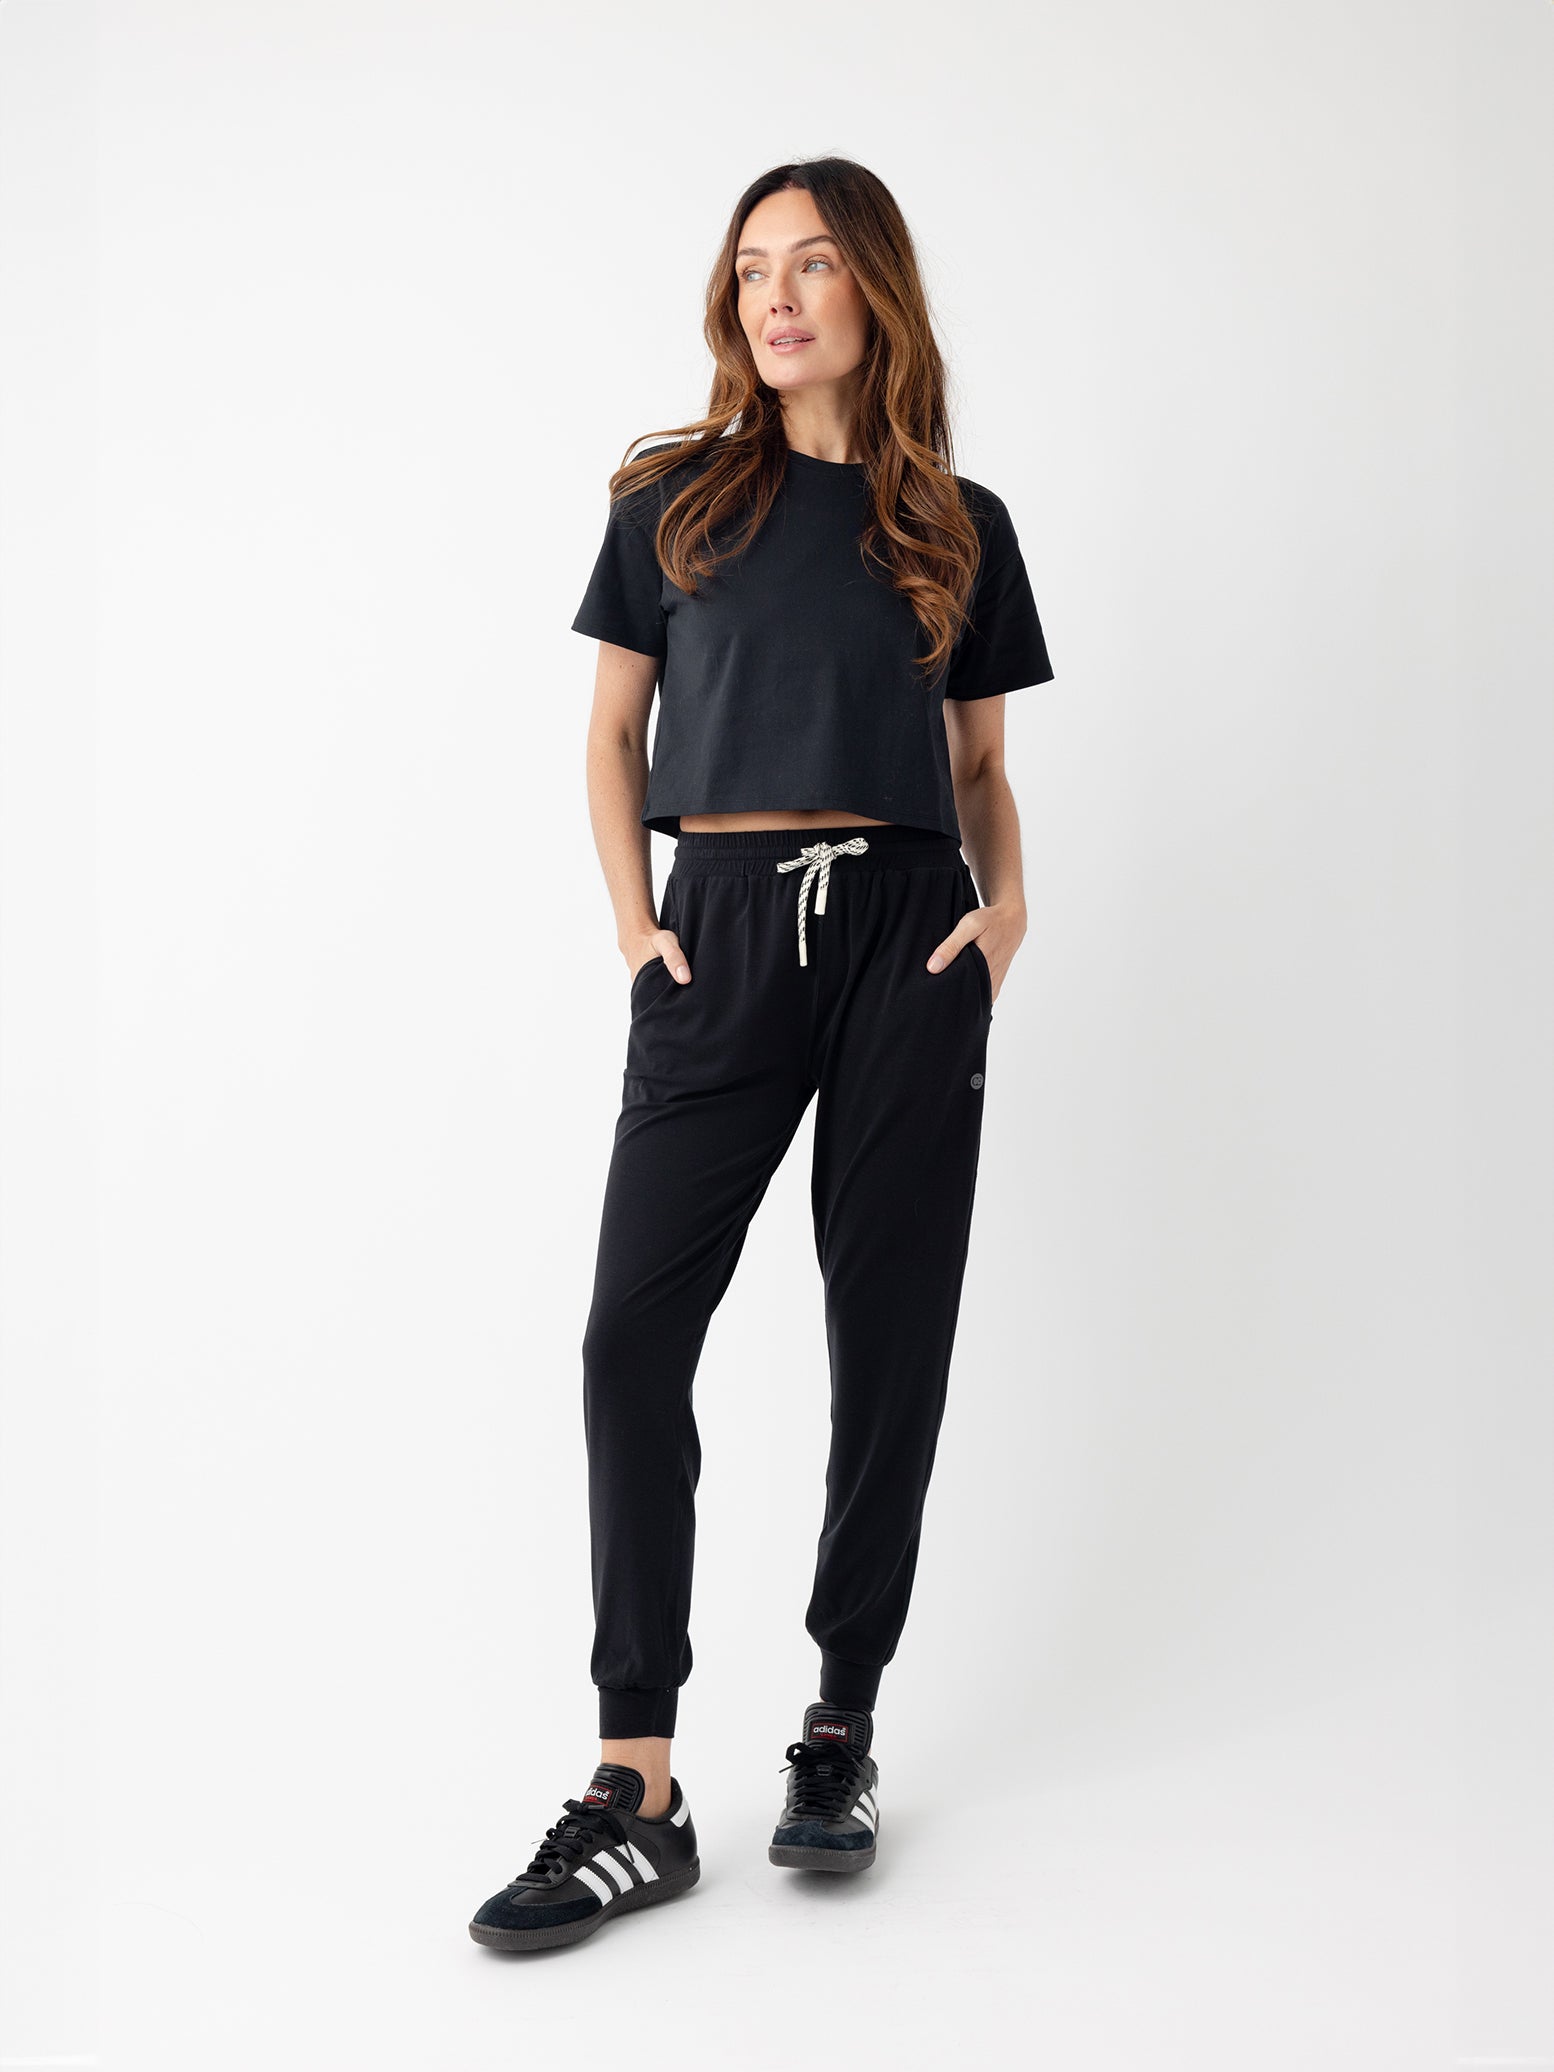 Jet Black All Day Cropped Tee. The photo of the All Day Cropped Tee is taken with a with a white background and is worn by a woman. 